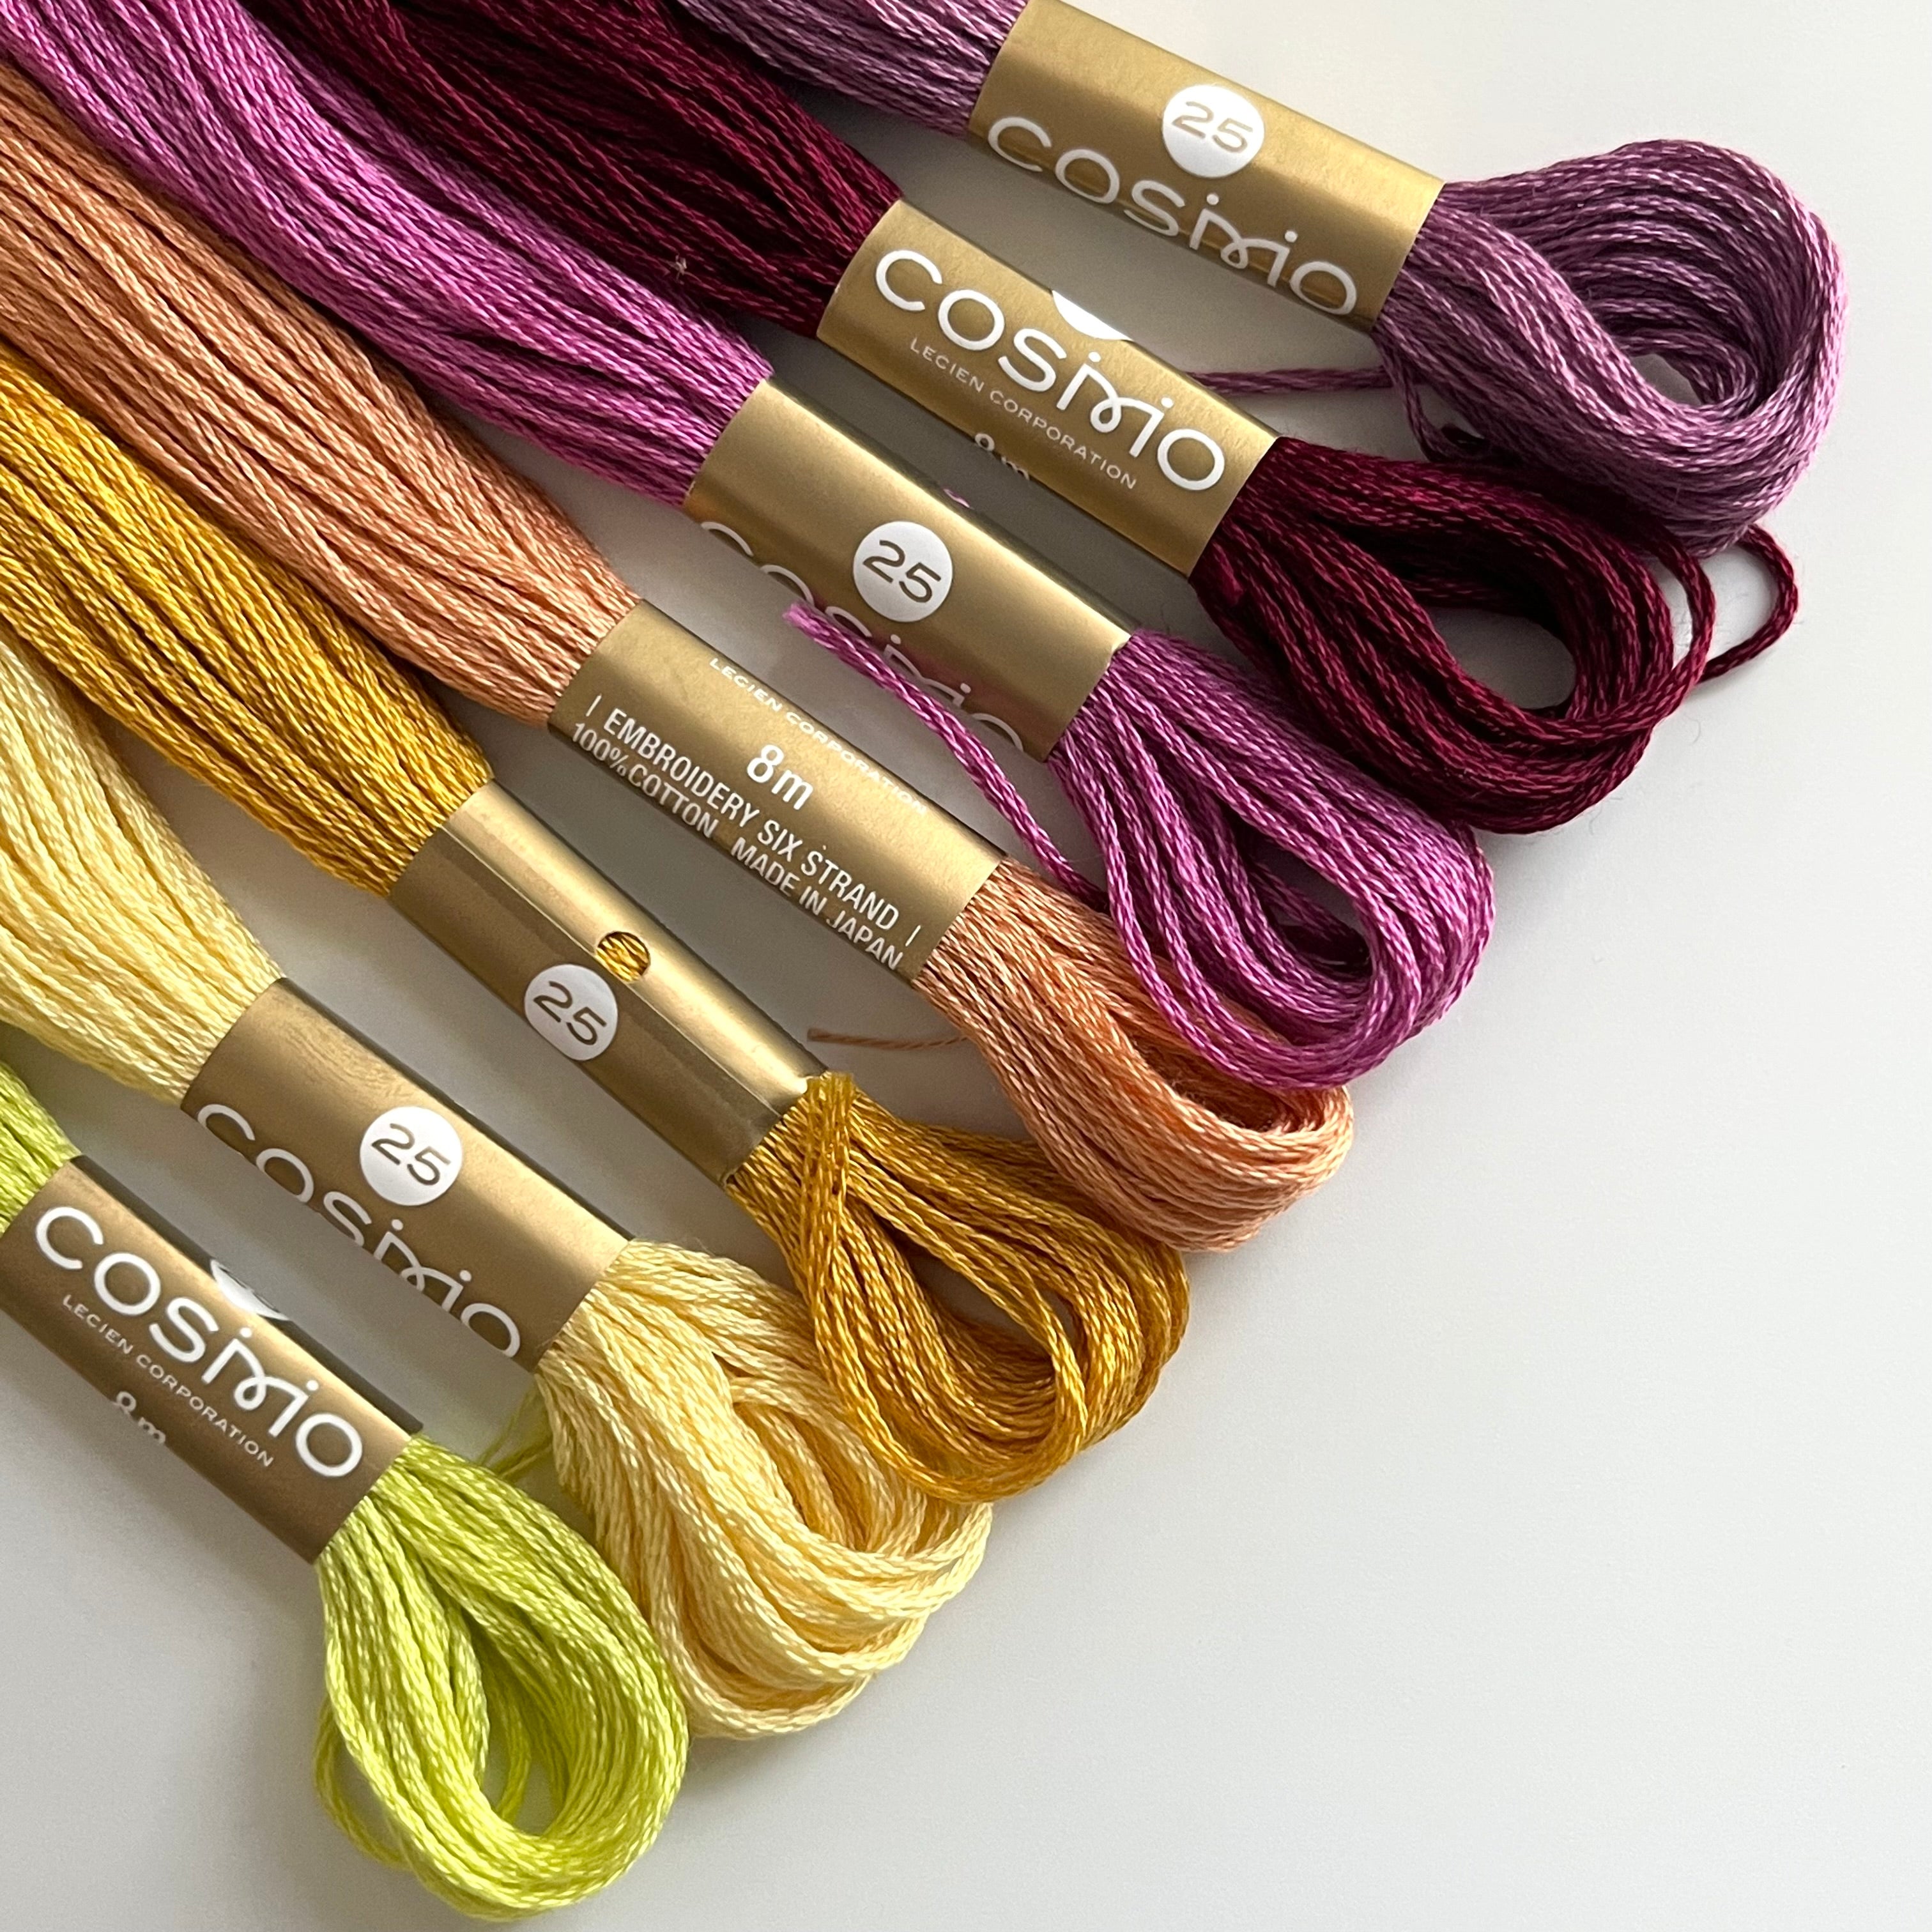 Cosmo Cotton Embroidery Floss 8m Skein - Greens/Blues/Purples